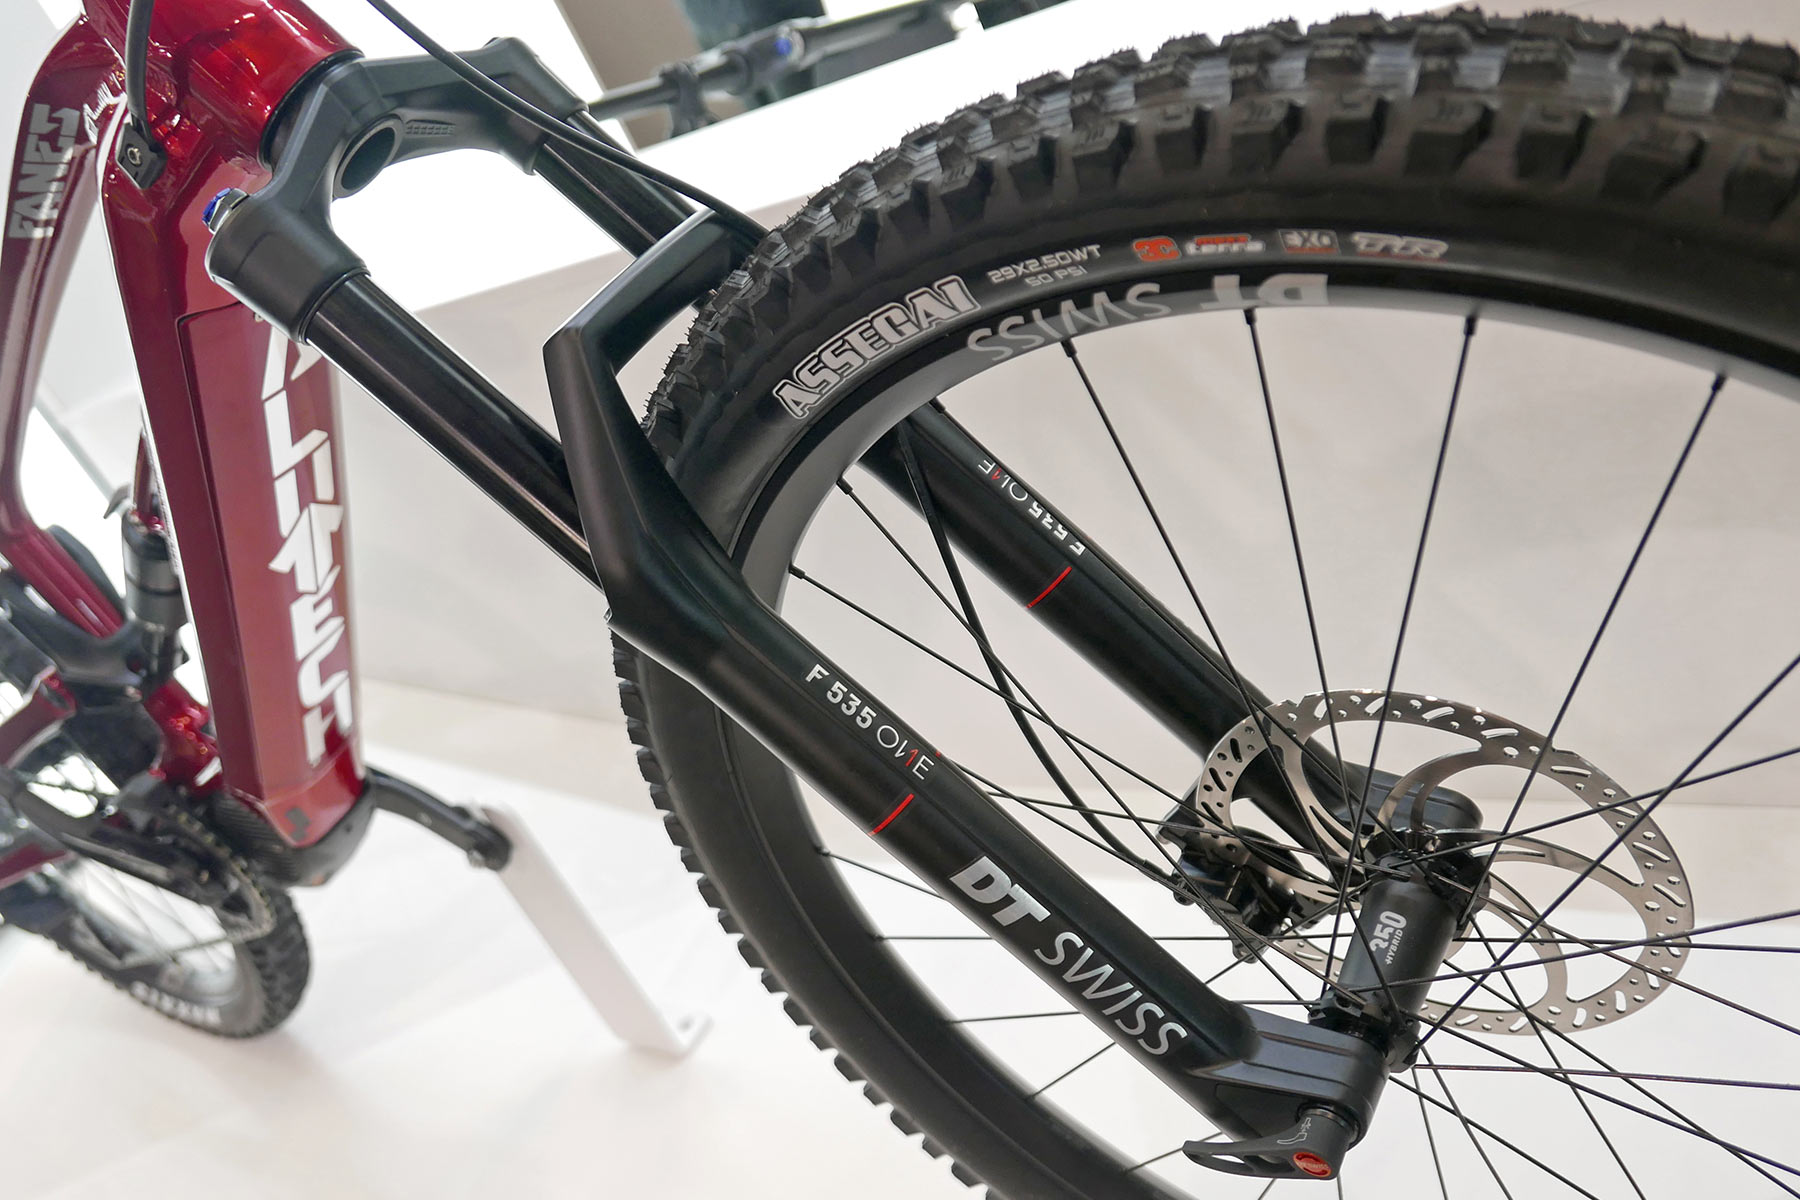 DT Swiss 535 trail all-mountain bike suspension upgrades, new ONE & standard forks and shocks